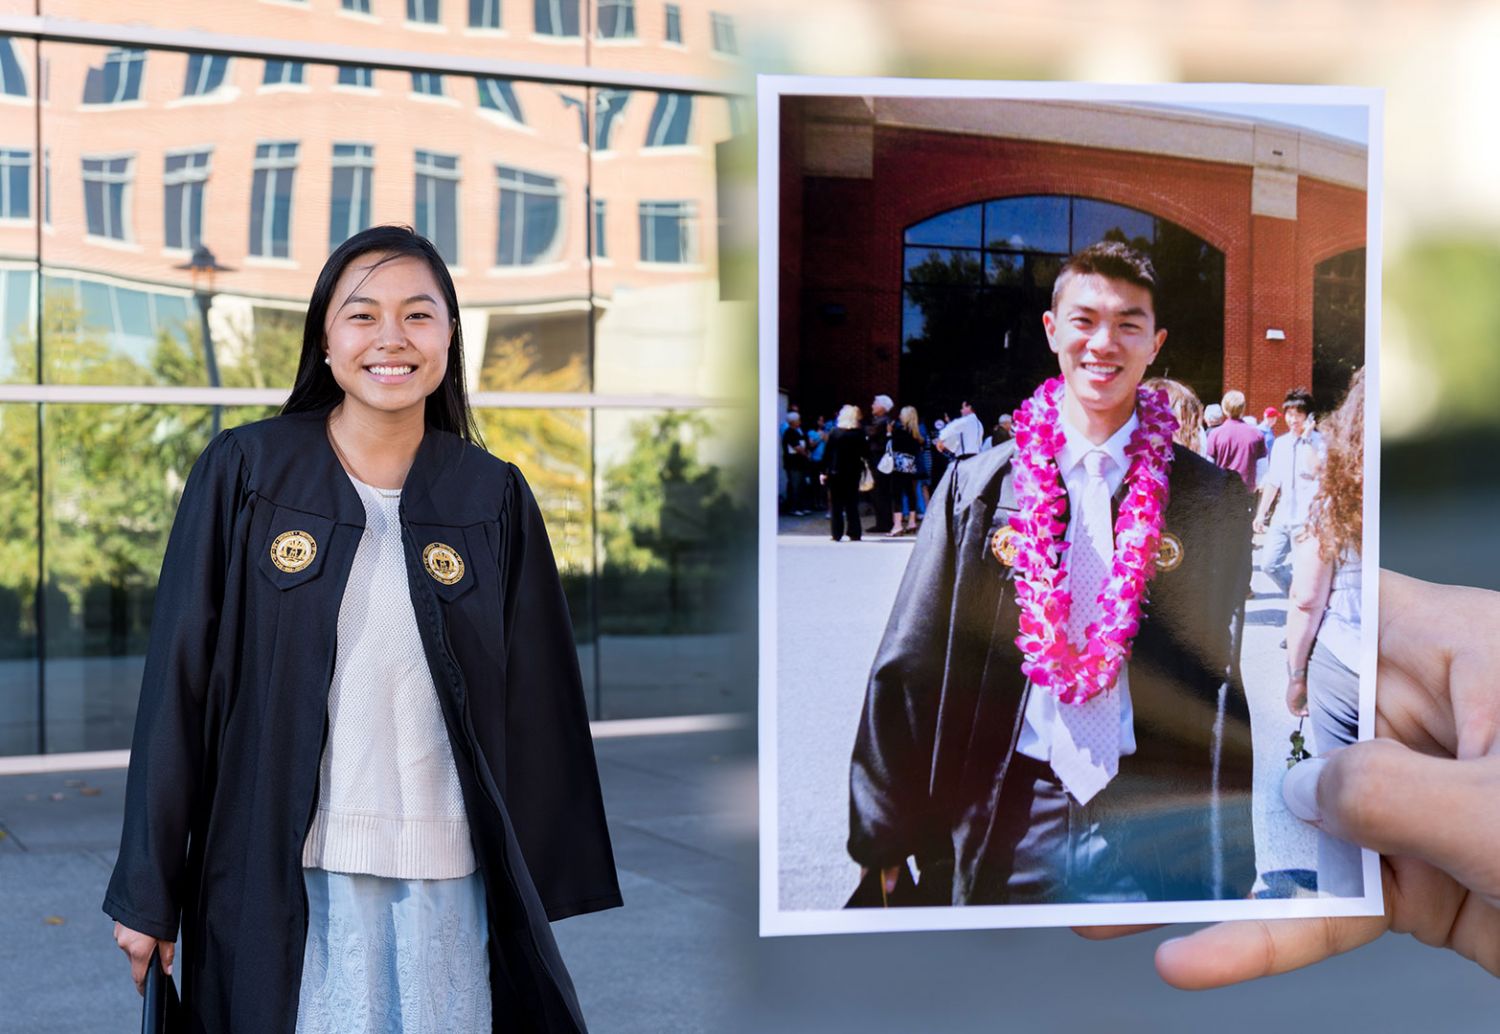 photo composite - student holding vintage photo, and present day photo of student